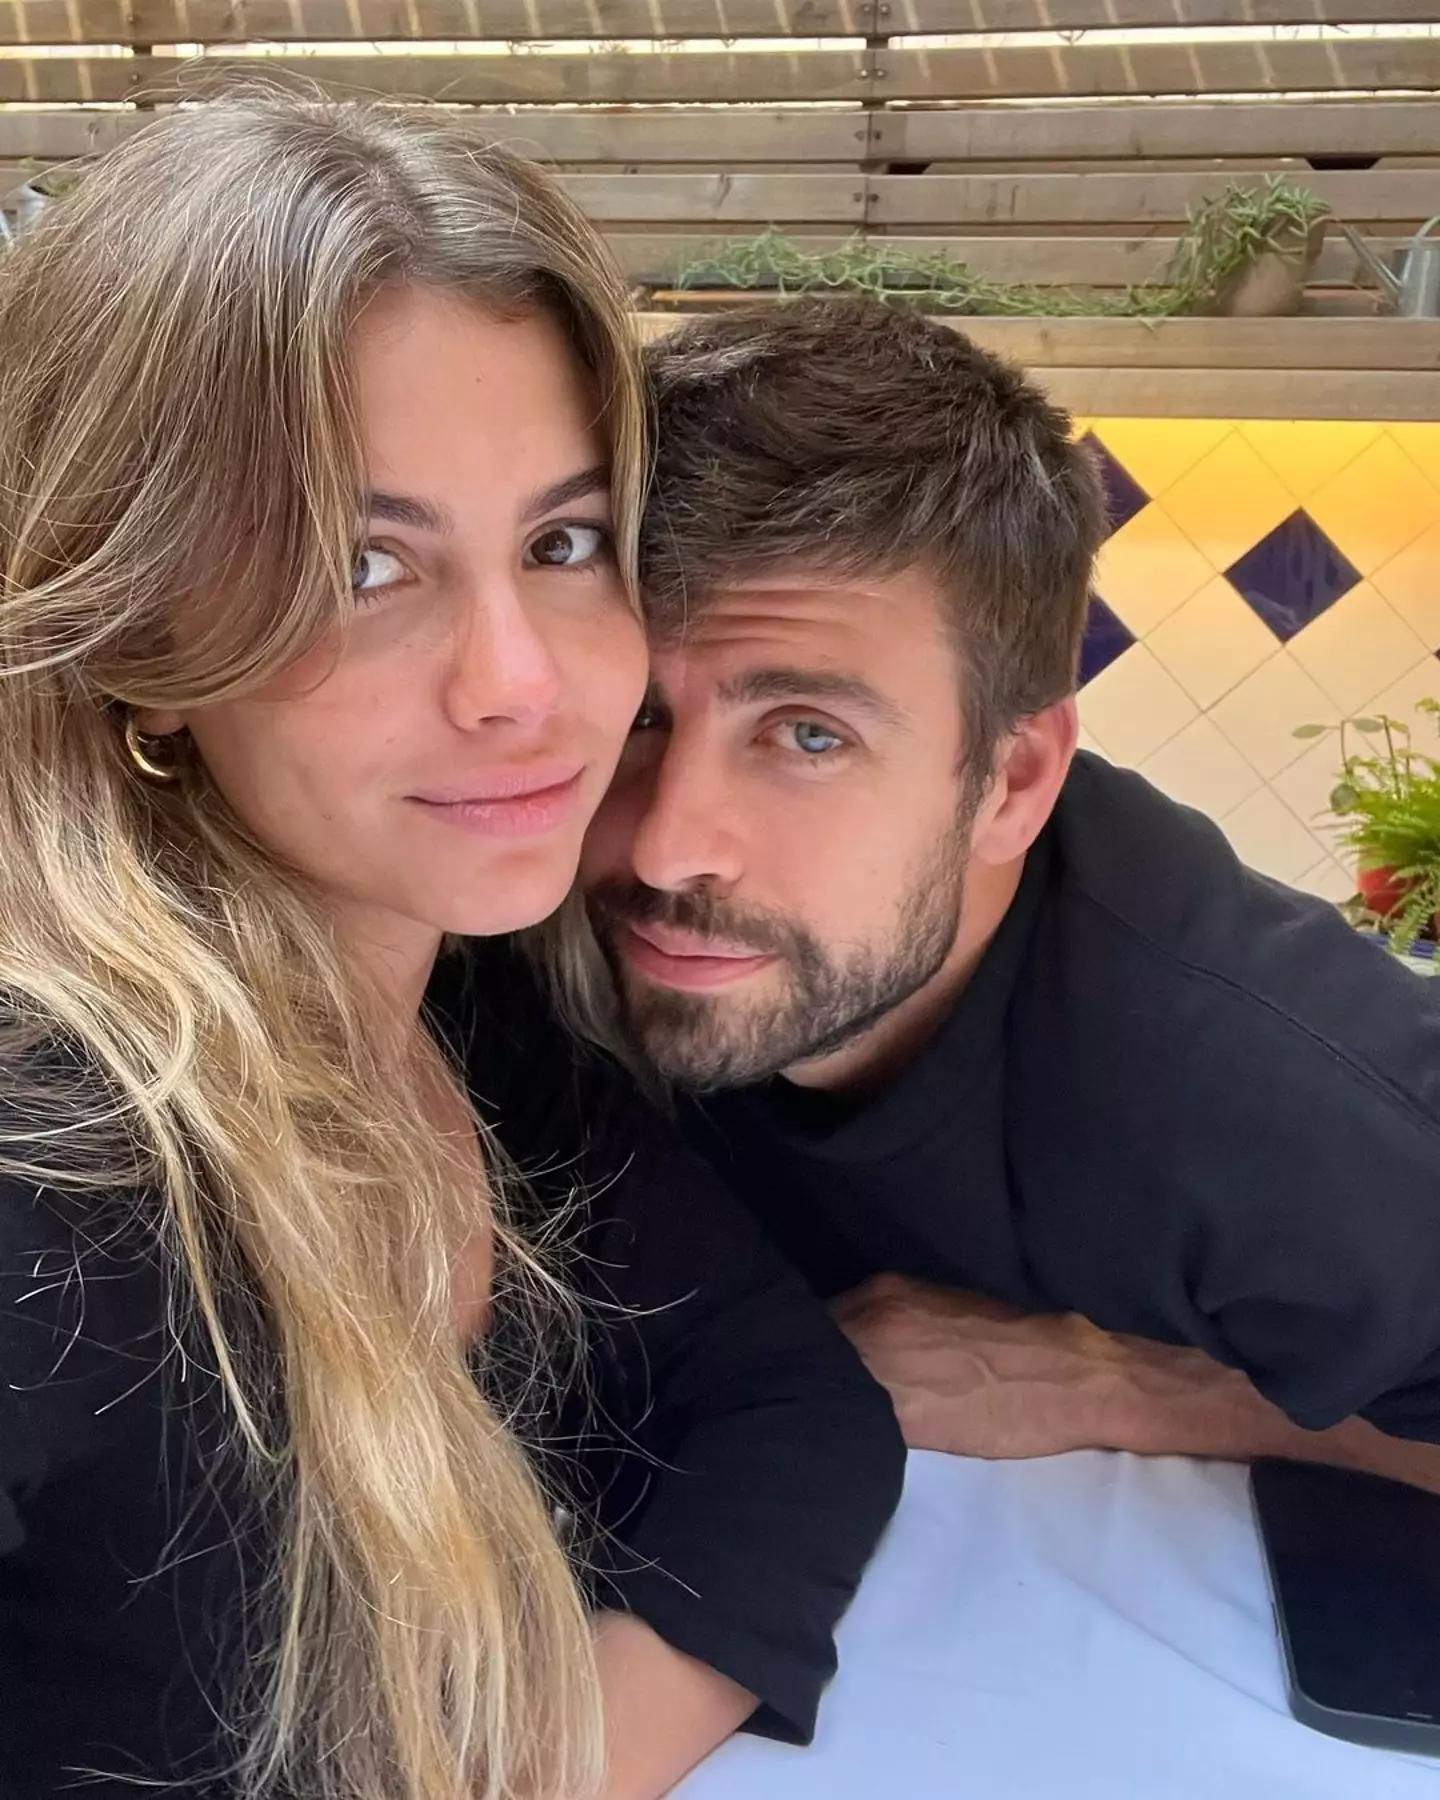 Pique recently confirmed his relationship with Clara Chia Marti.